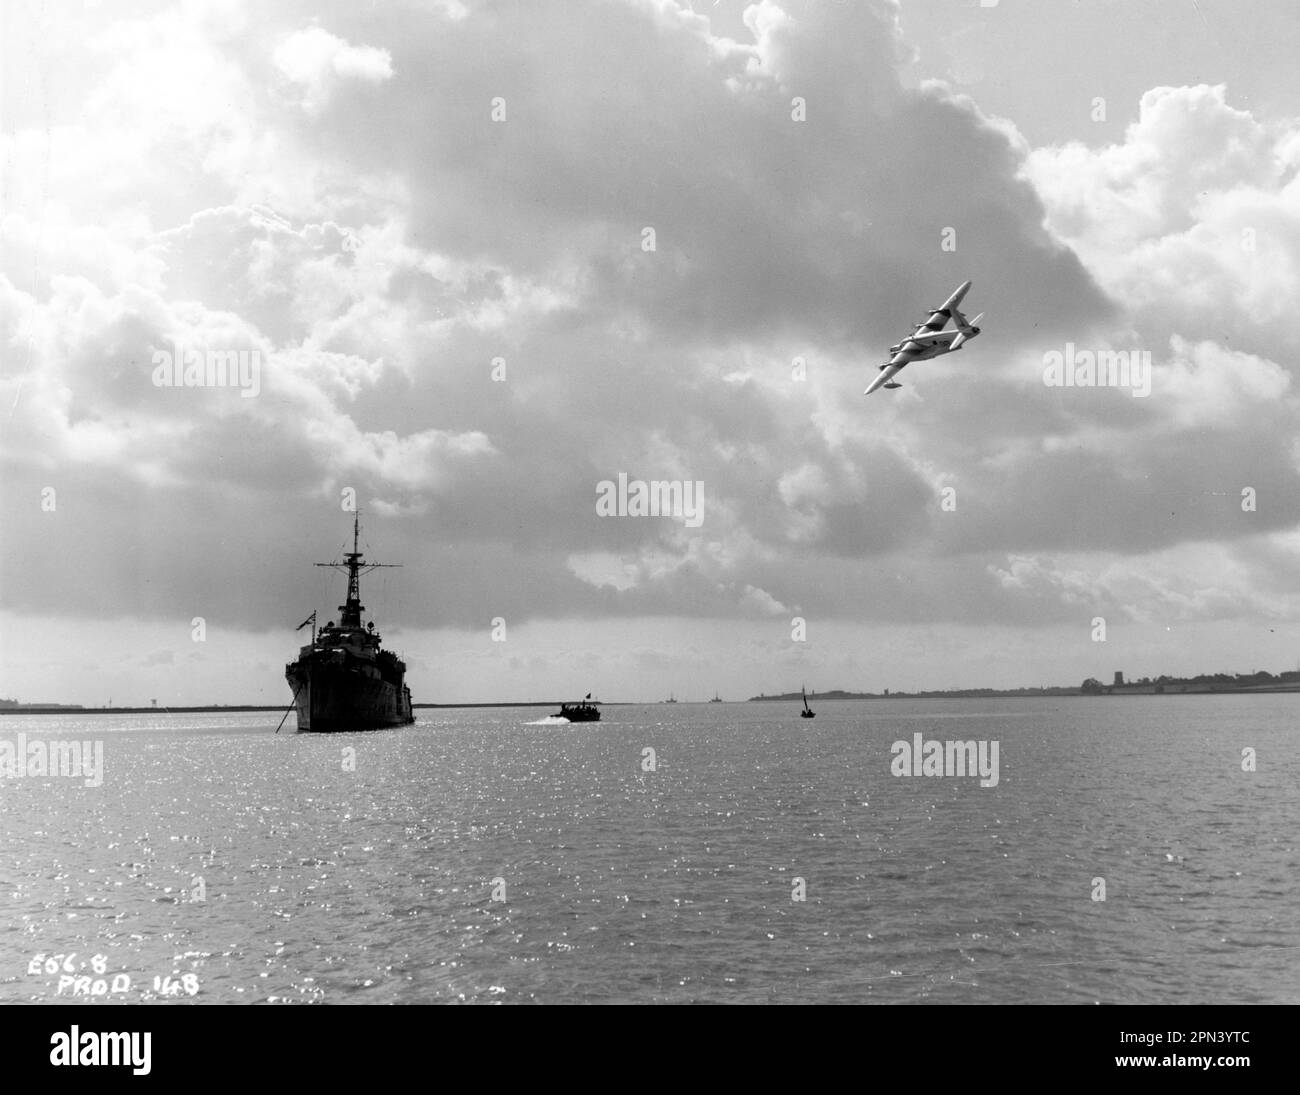 H.M.S AMETHYST and Seaplane on River Orwell, Ipswich, Suffolk during location filming of YANGTSE INCIDENT 1957 director MICHAEL ANDERSON screenplay Eric Ambler Wilcox-Neagle / Everest Pictures Ltd. / British Lion Film Corporation Stock Photo